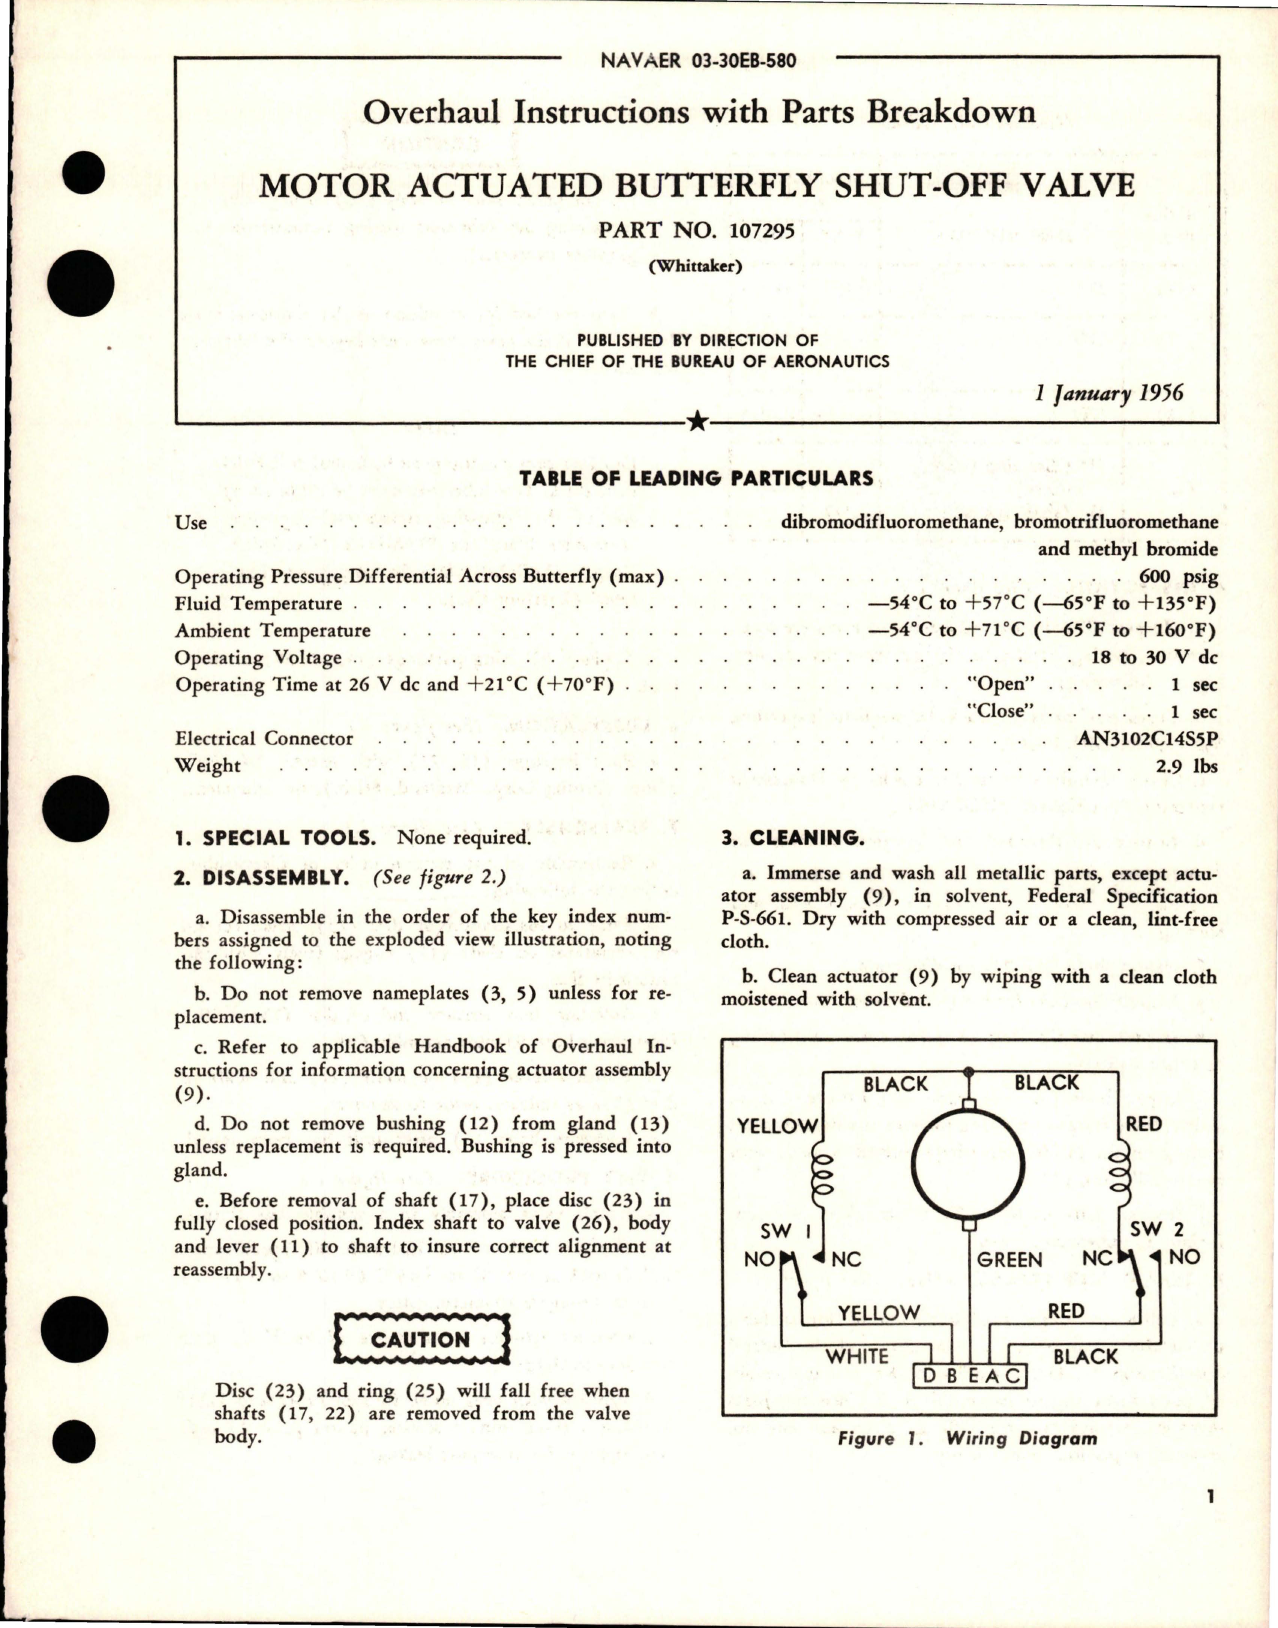 Sample page 1 from AirCorps Library document: Overhaul Instructions with Parts Breakdown for Motor Actuated Butterfly Shut-Off Valve - Part 107295